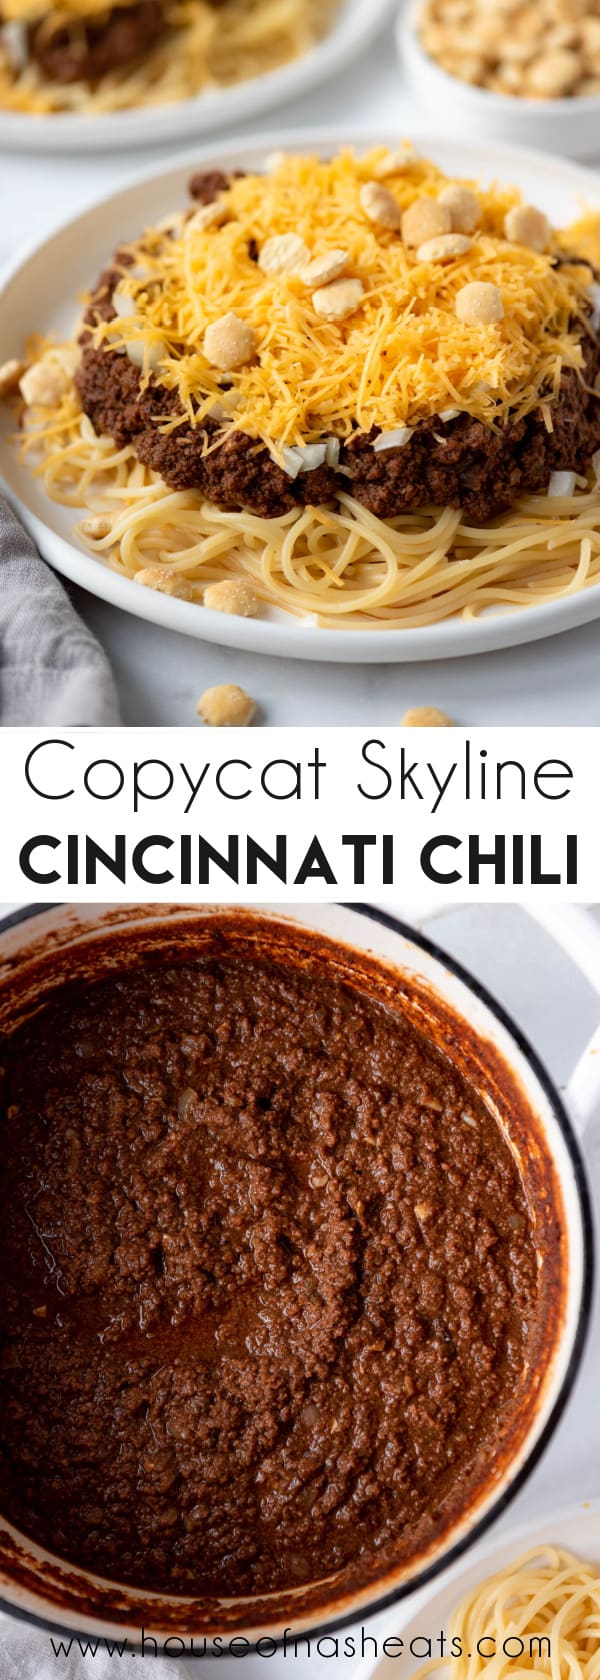 A collage of images of Cincinnati chili with text overlay.